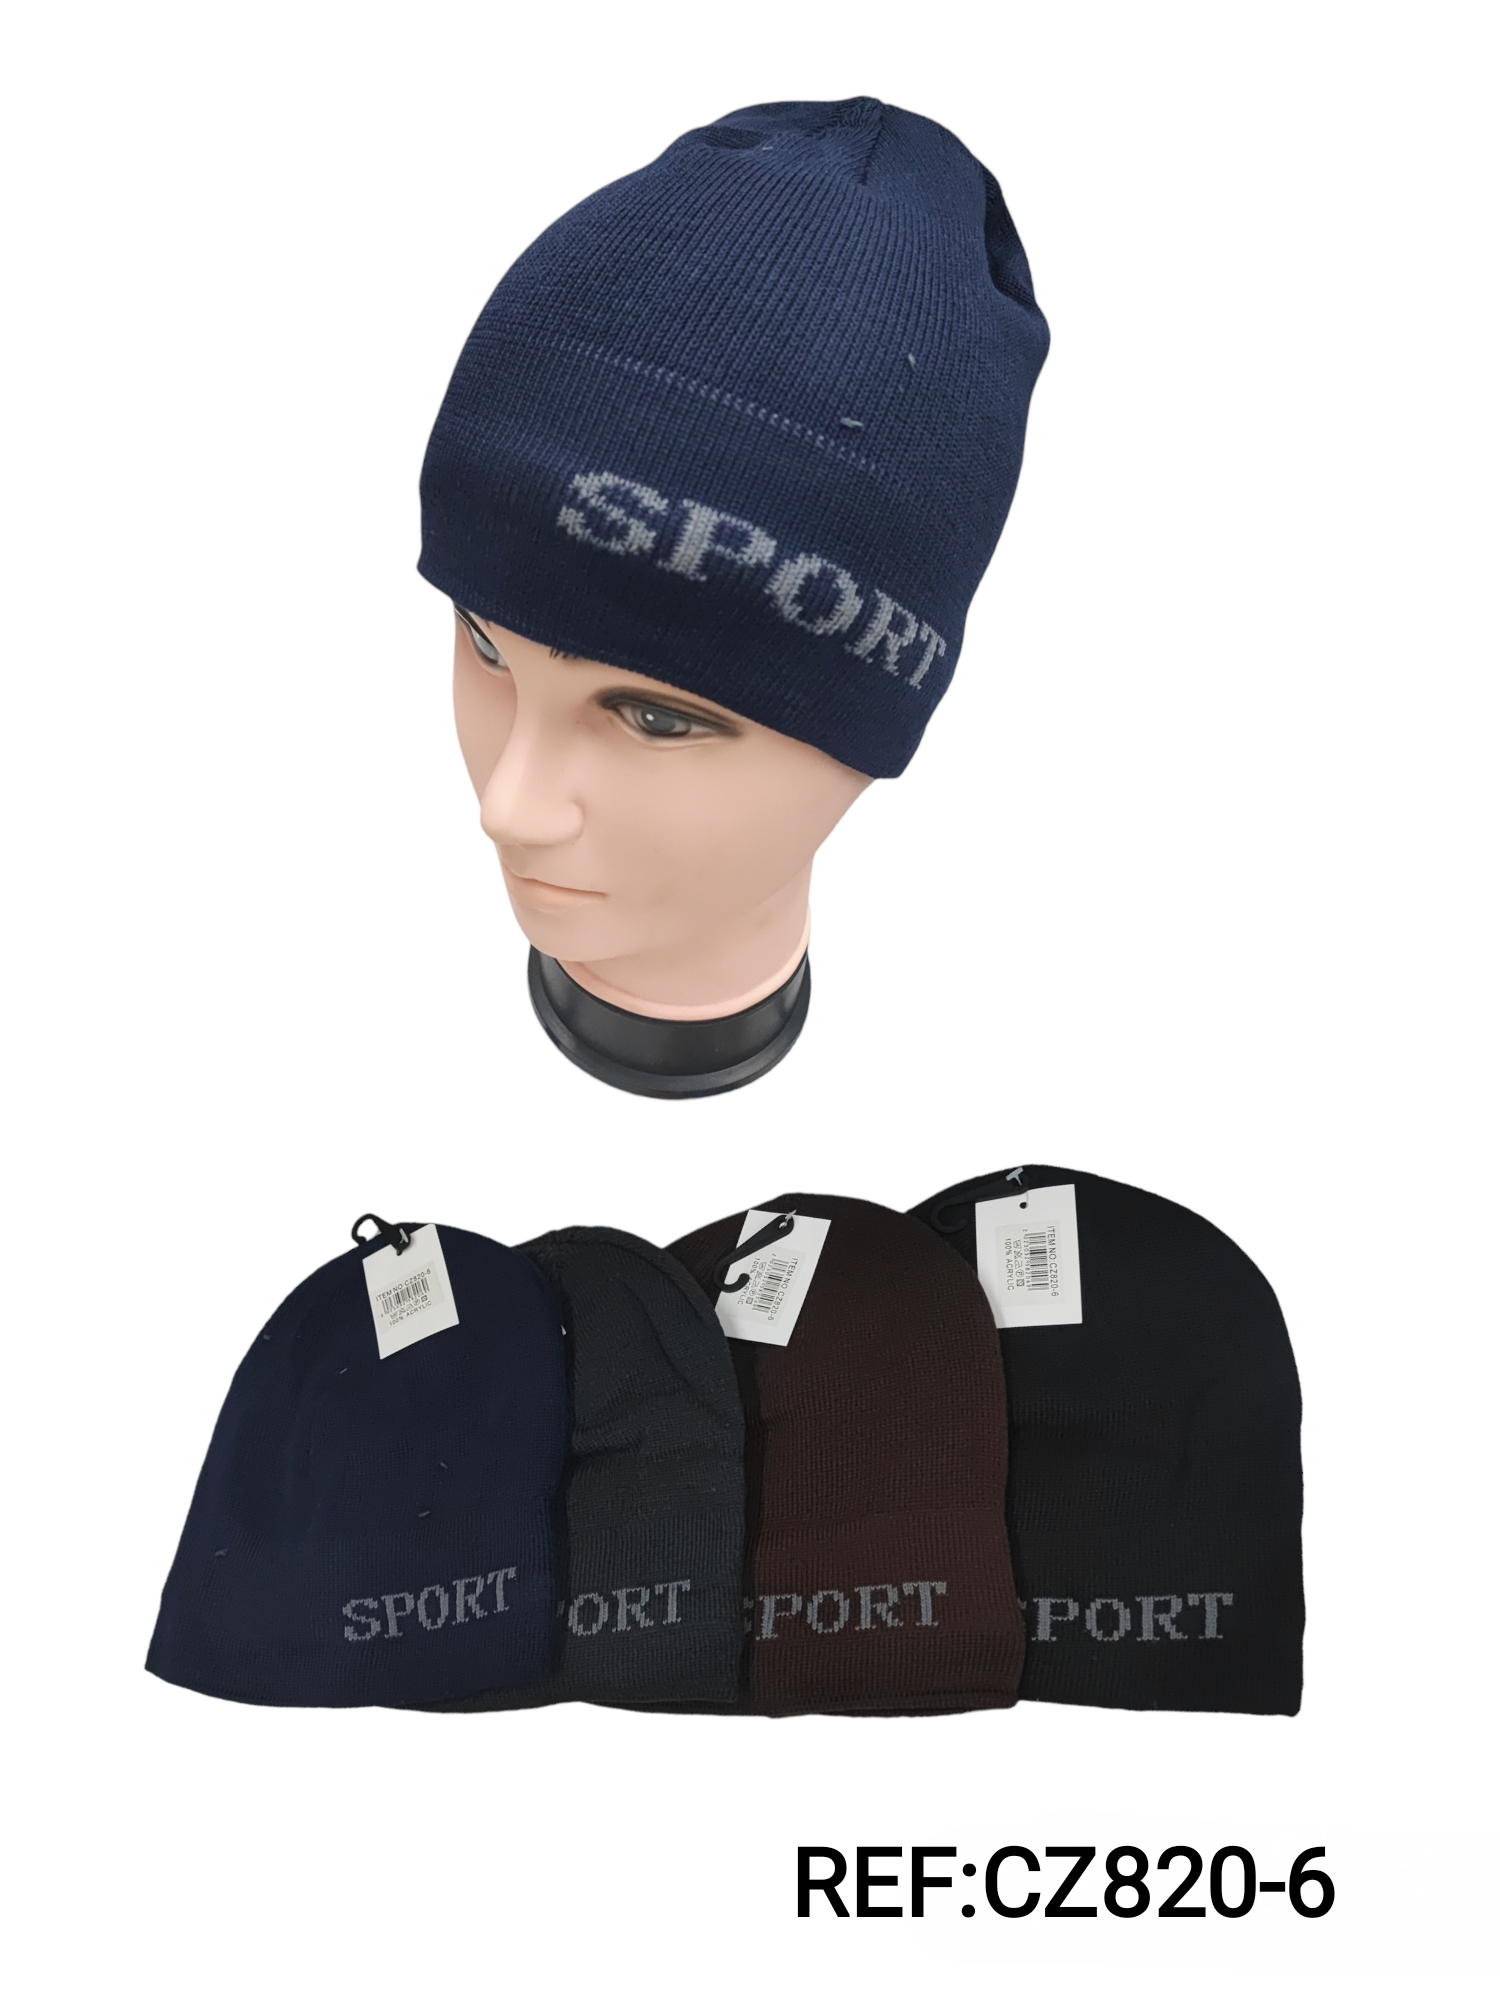 Fleece hat with sports writing detail (x12) *6